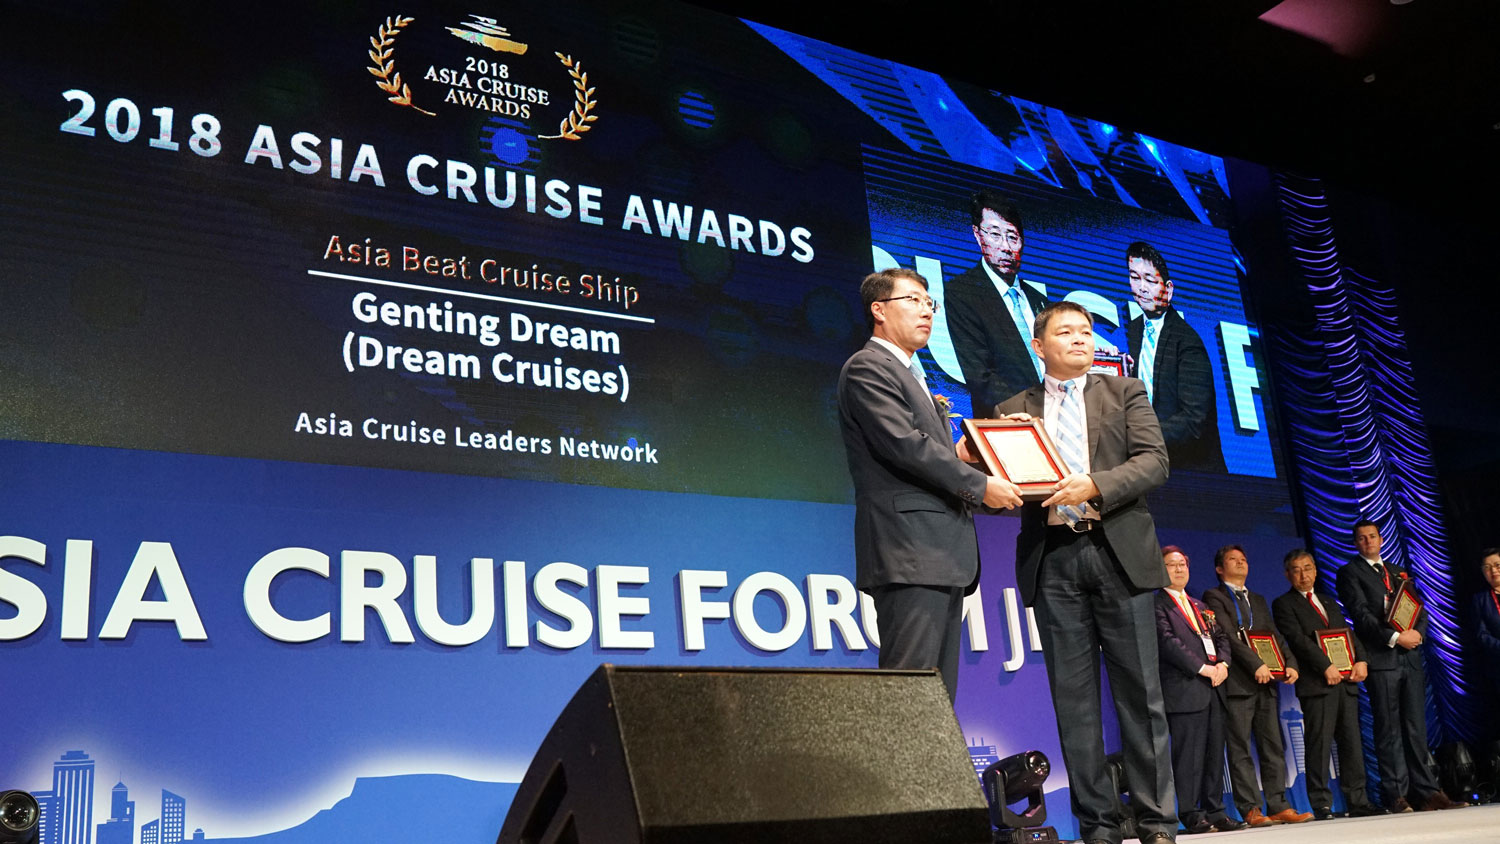 Mr. Raymond Lim, Senior Vice President, Planning & Port Management, Port Operations, Genting Cruise Lines (right) accepted the Asia’s Best Cruise Ship Award on behalf of Dream Cruises.